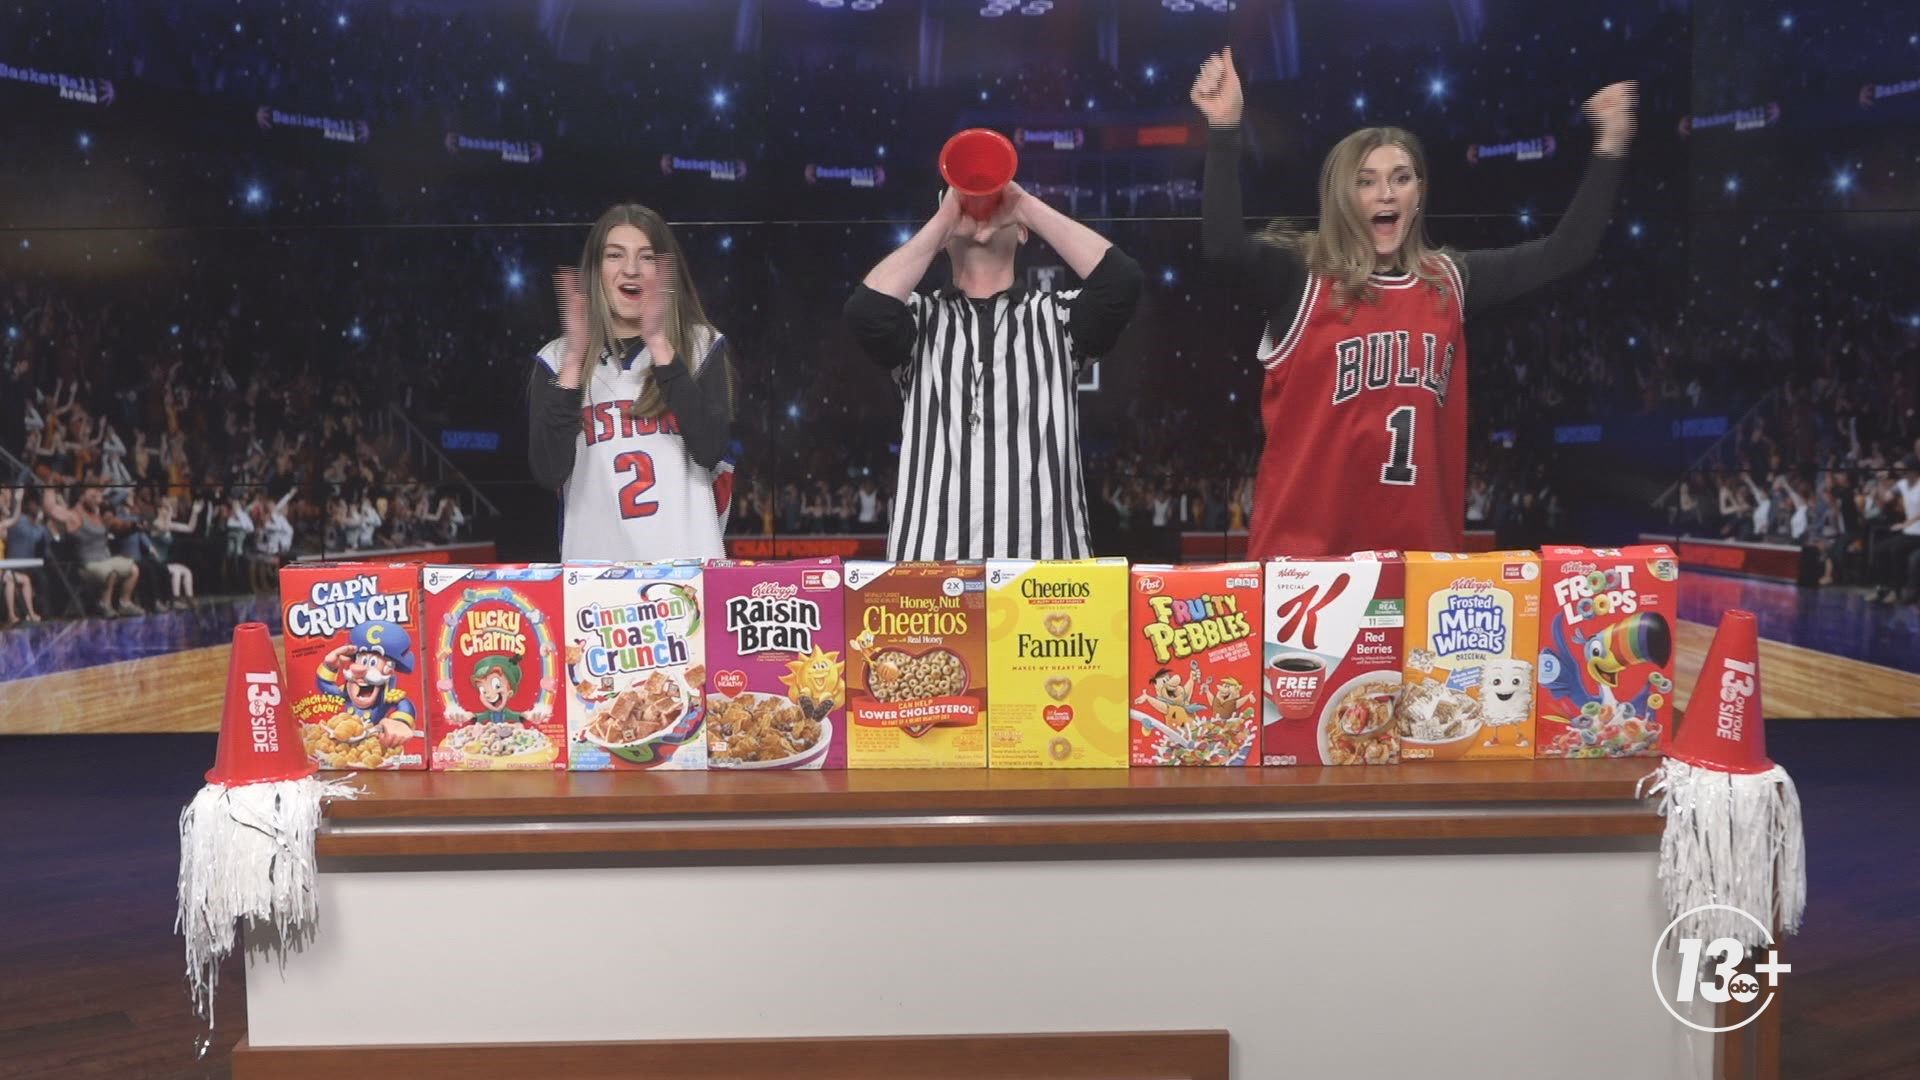 13 ON YOUR SIDE's Riley Mack, Alana Holland and Steven Bohner put the 10 most popular cereals to the test in a basketball bracket-style tournament.